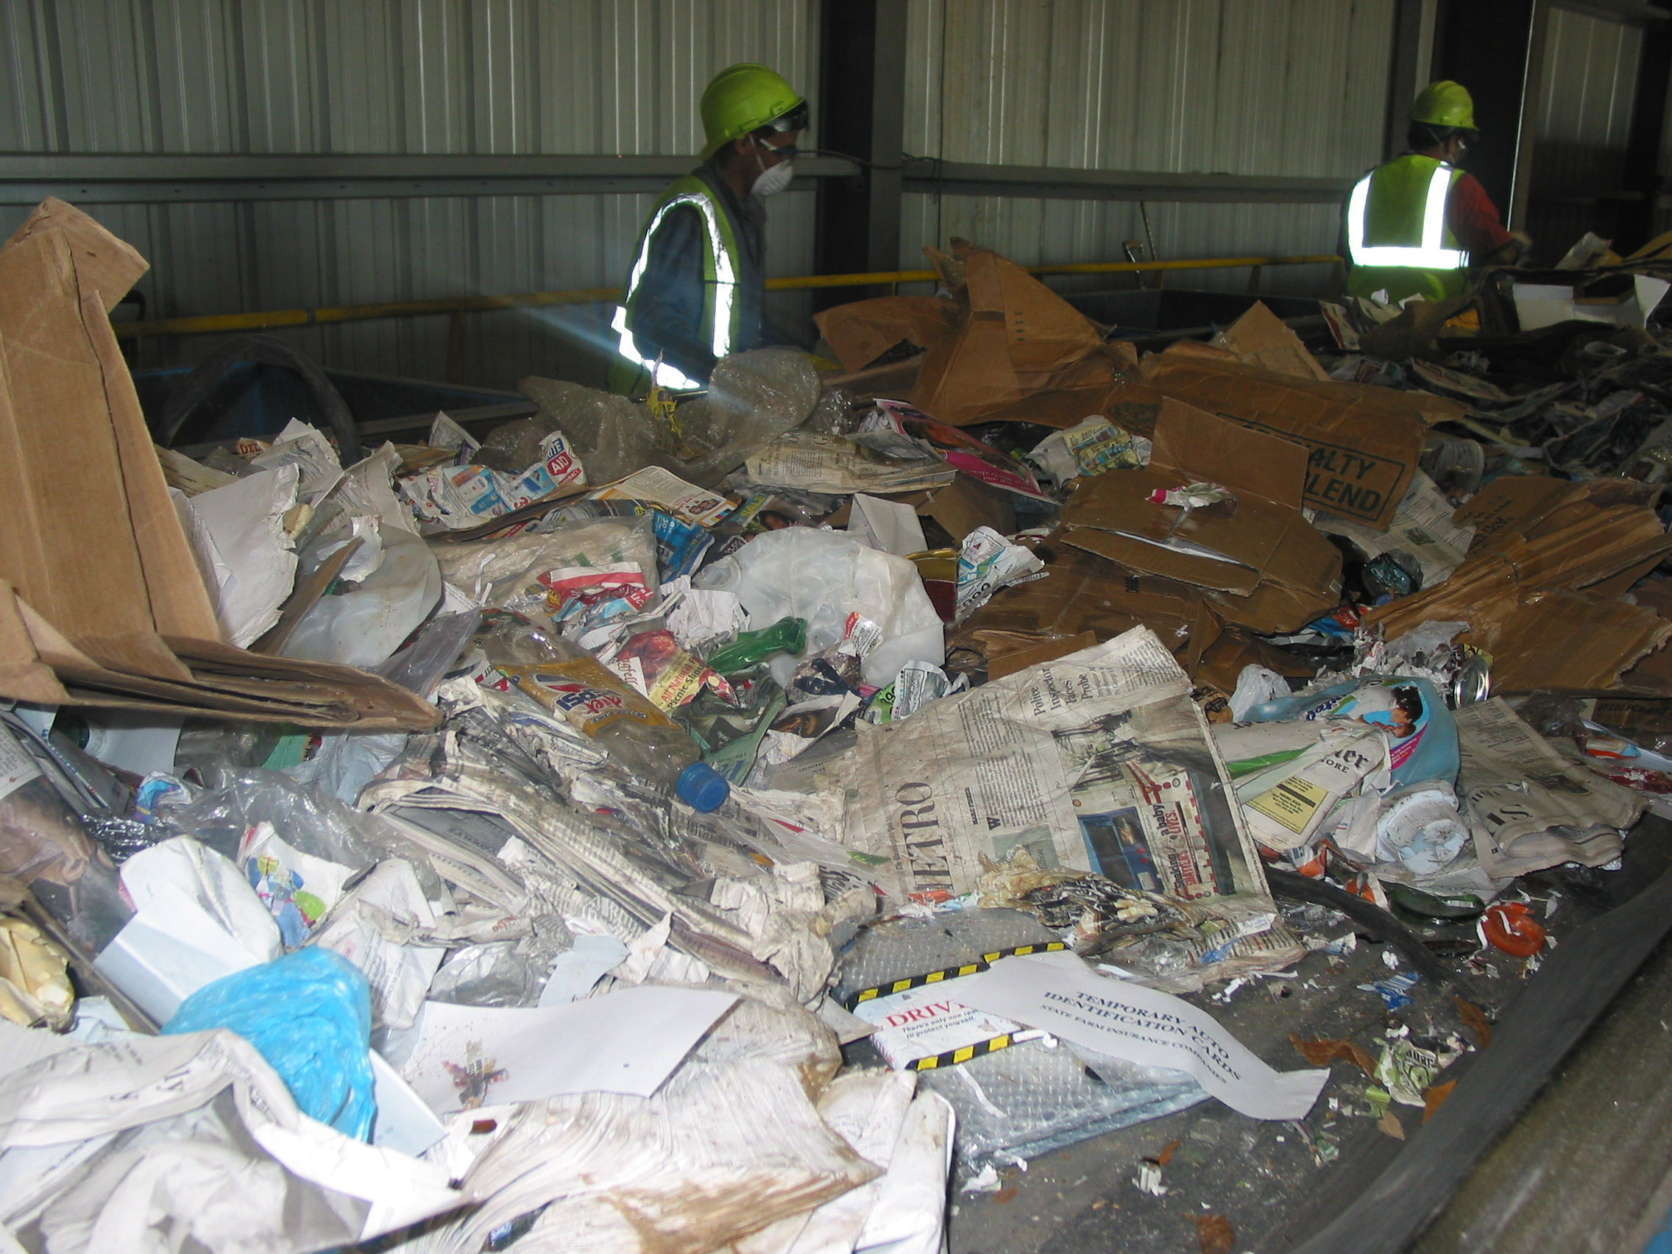 Workers at Prince George’s County Materials Recycling Facility in Capitol Heights, Maryland, sort through the items collected through single-stream recycling. (Courtesy Prince George's County)